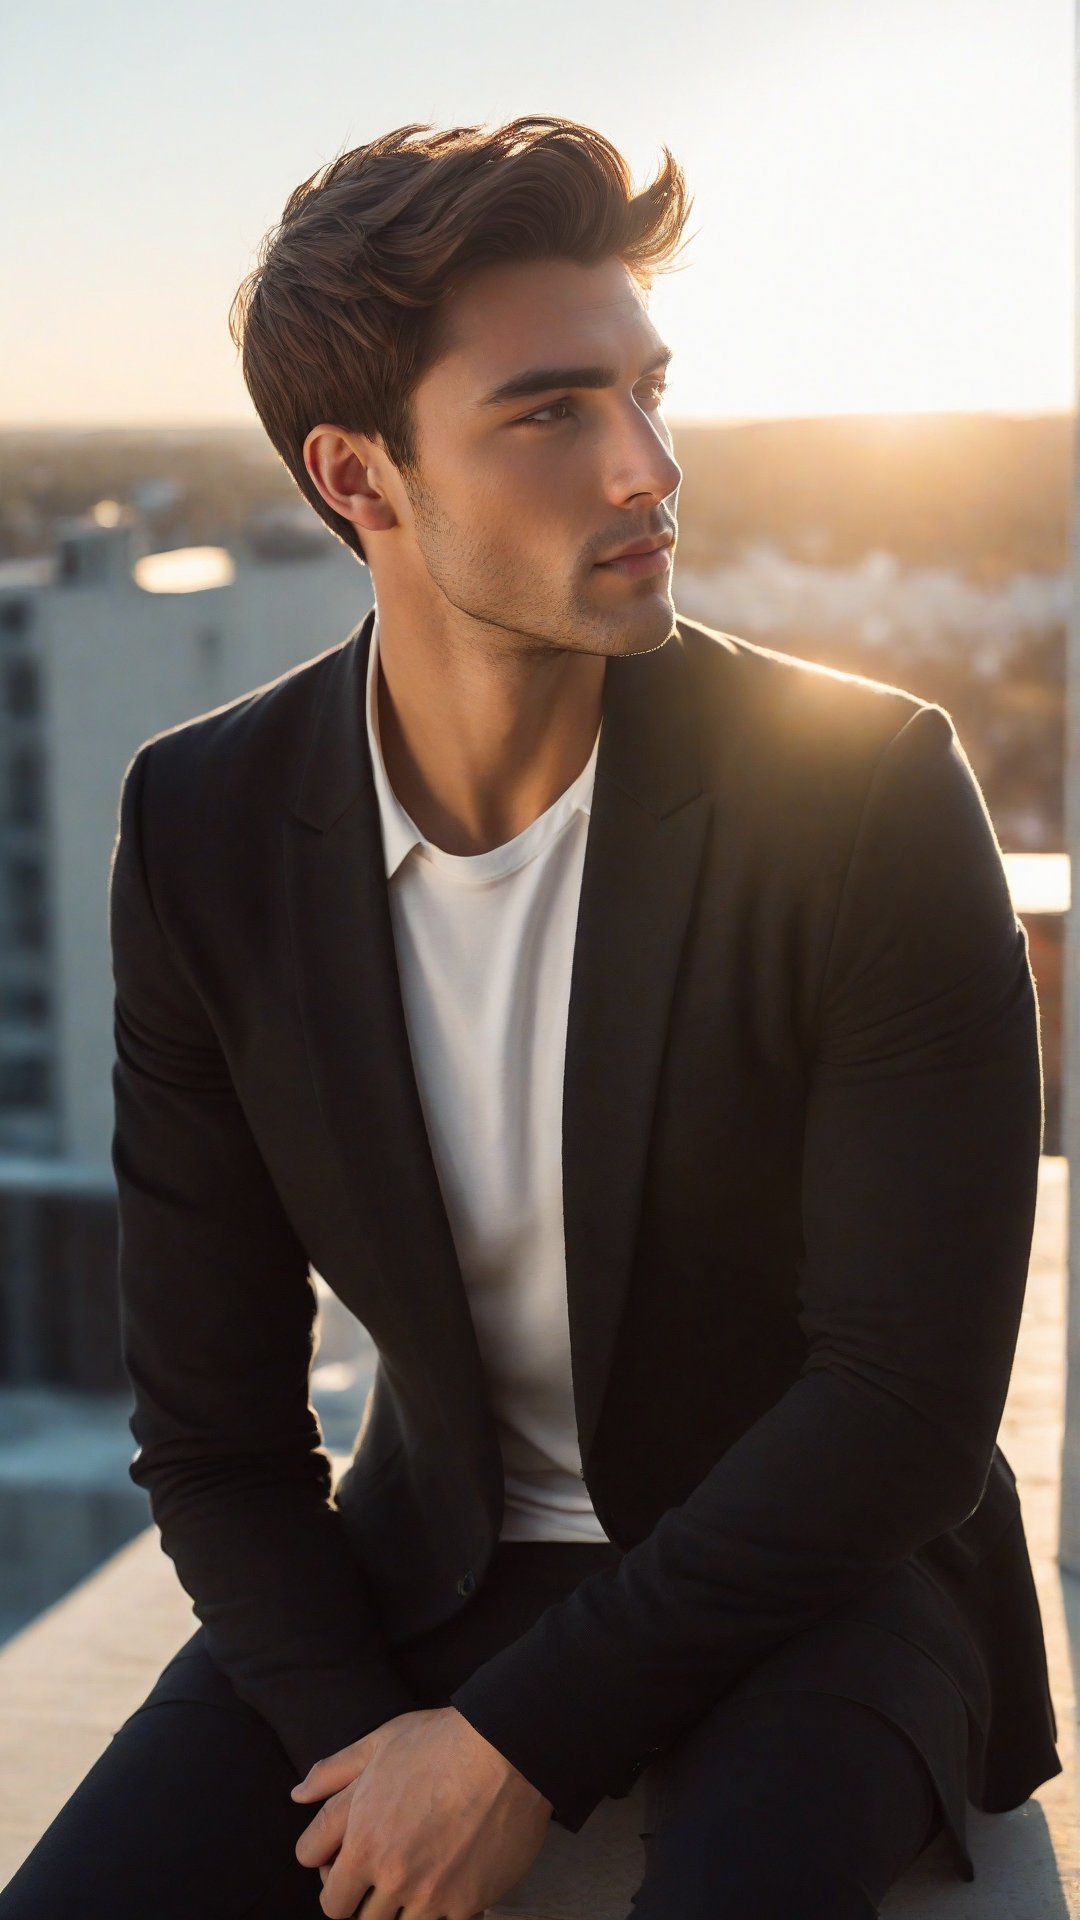 a young handsome man sits outdoors, possibly on a rooftop, leaning forward with his arms resting on his knees. He wears a dark blazer over a white ribbed sweater, exuding a thoughtful or introspective mood. The photograph captures a soft, natural light and displays a subtle lens flare, adding an artistic touch to the serene moment. masterpiece. bulge. sexy wink. view from below.